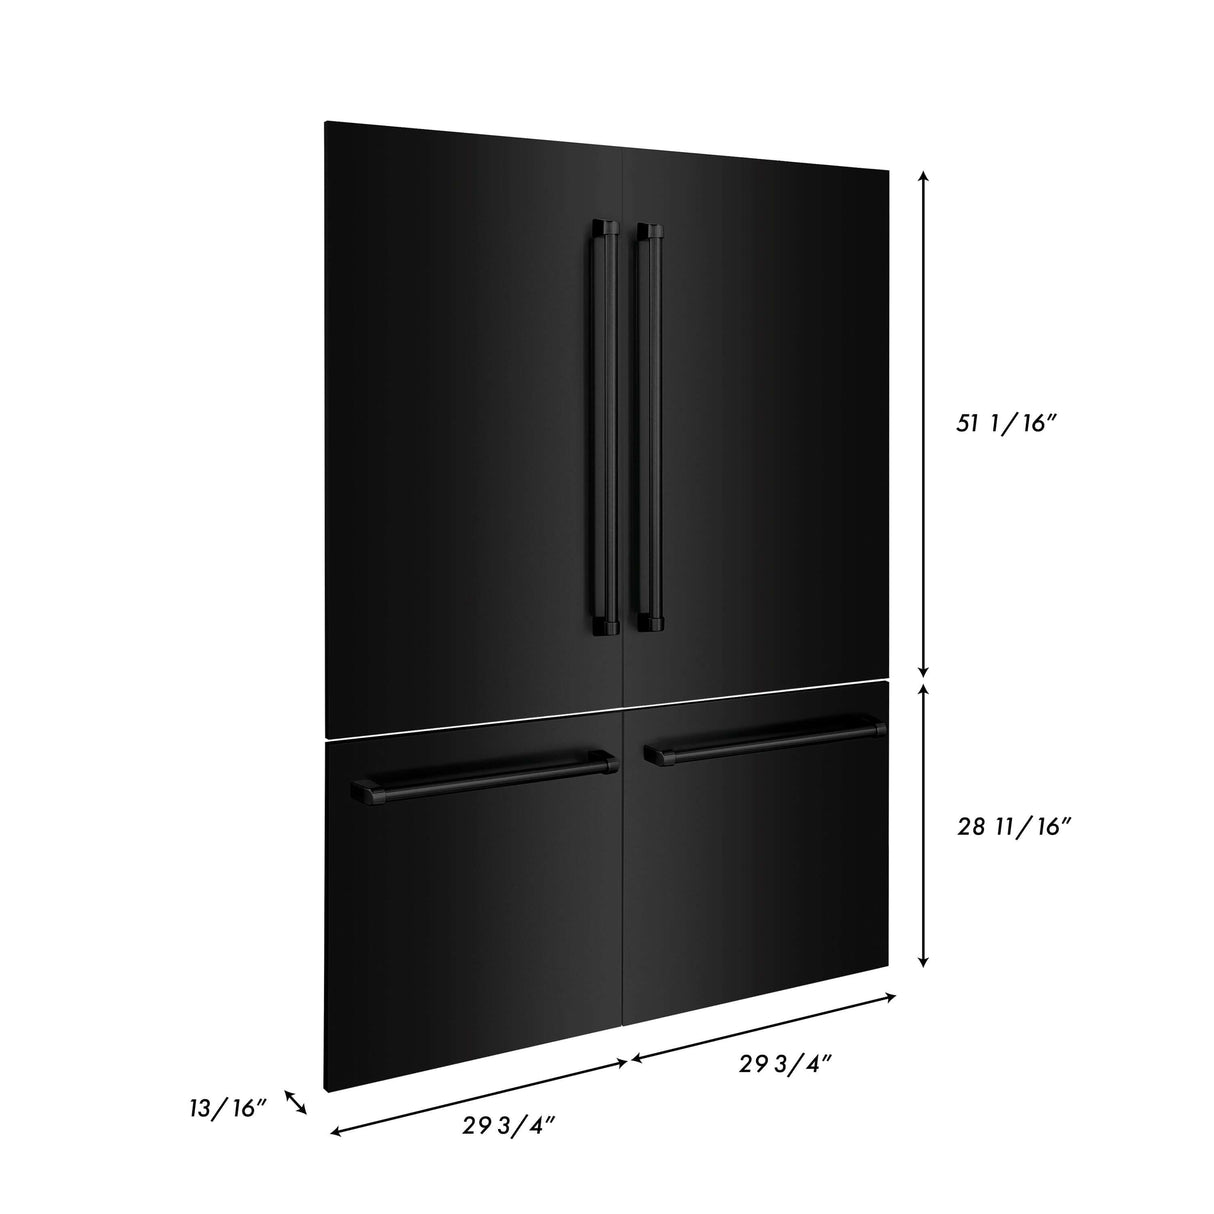 ZLINE 60 in. Refrigerator Panels and Handles in Black Stainless Steel for Built-in Refrigerators (RPBIV-BS-60)